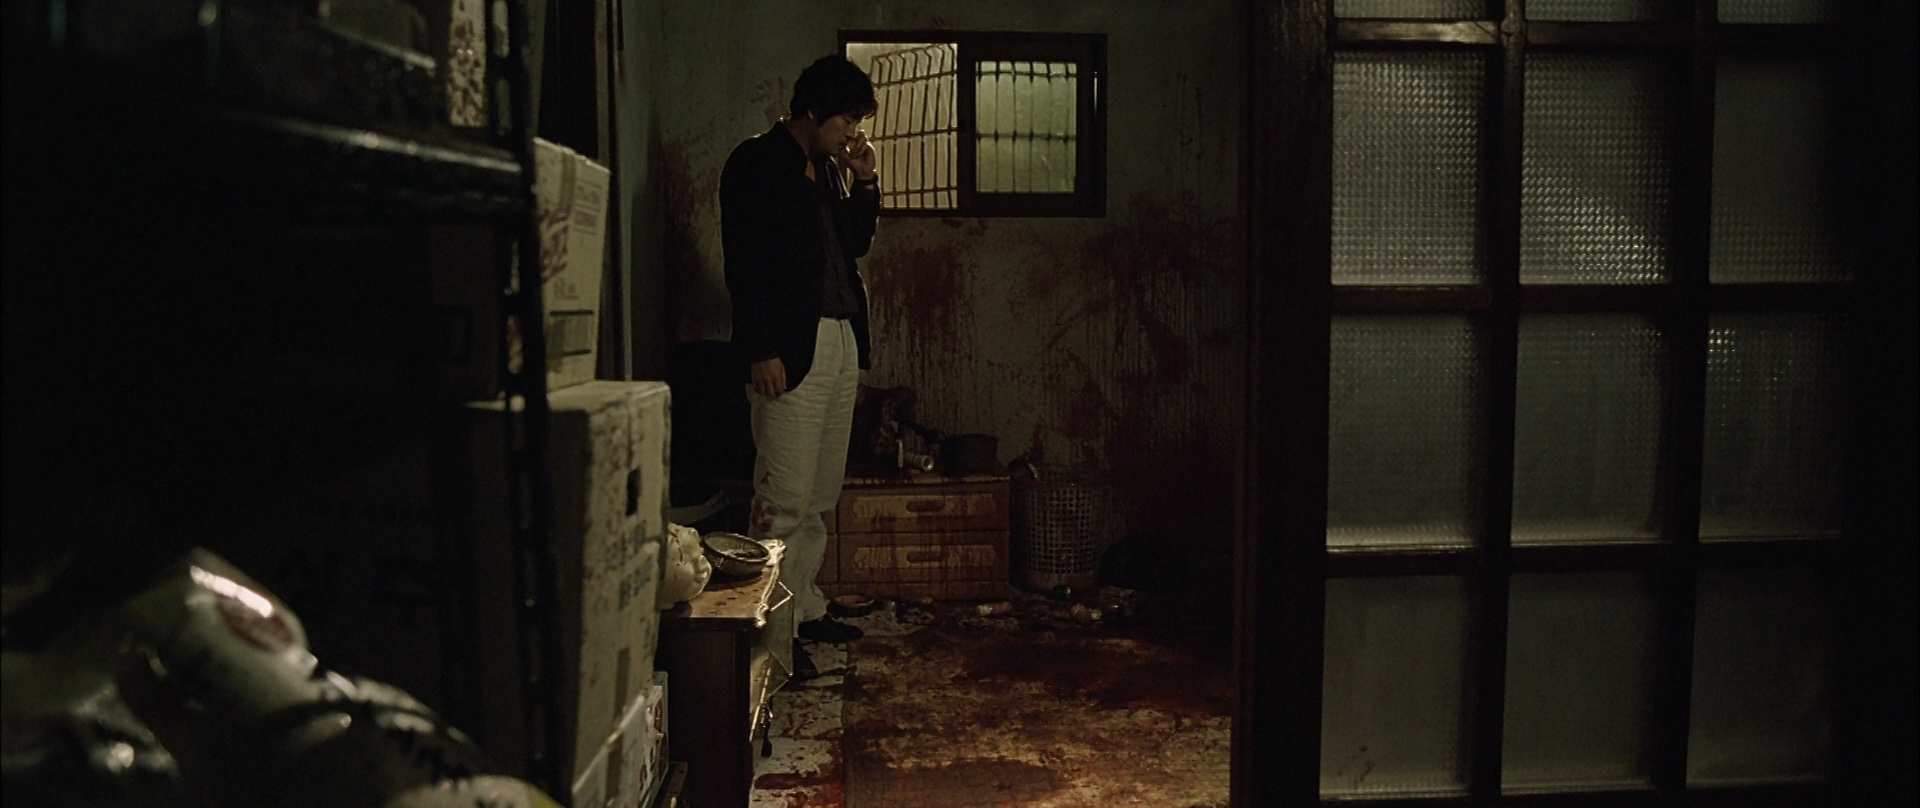 Joong-ho stands in a bloody room while listening to a voicemail on his cellphone.